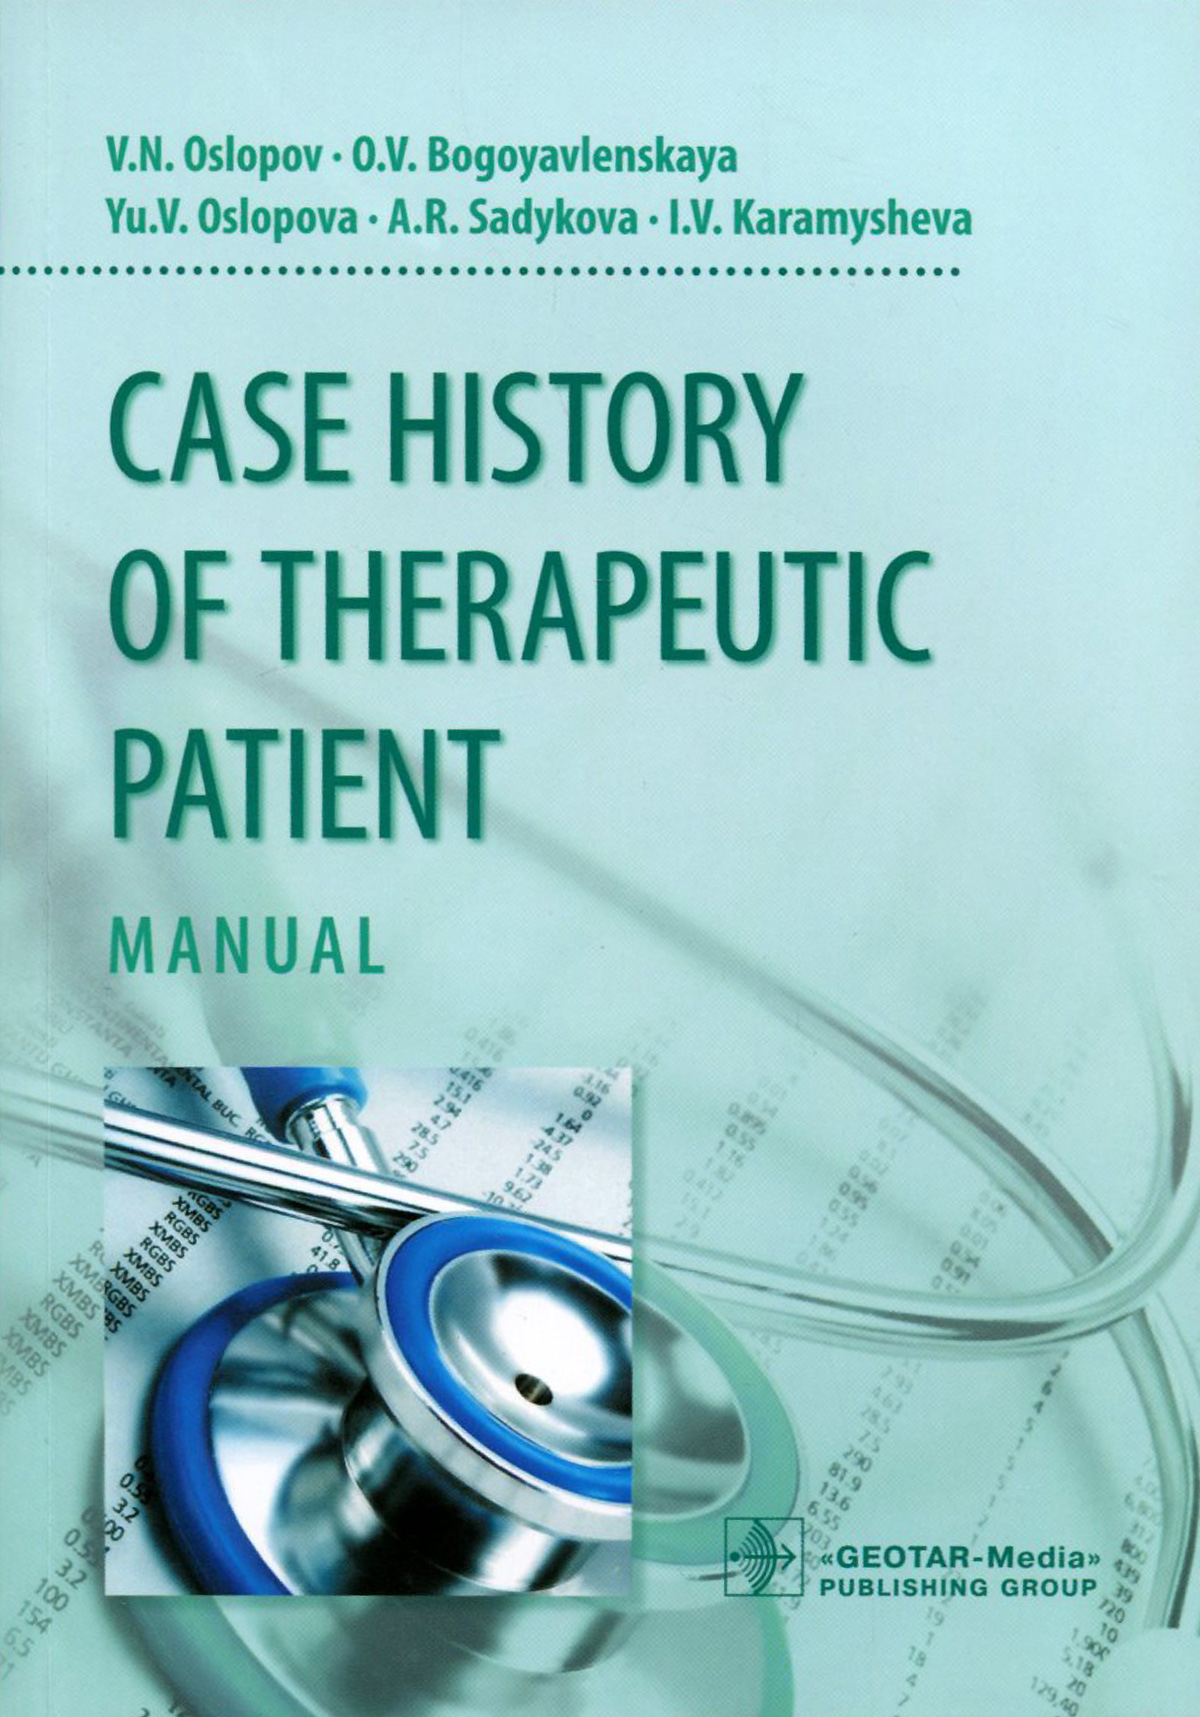  .,  .,  .,  .,  . Case History of Therapeutic Patient. Manual.     